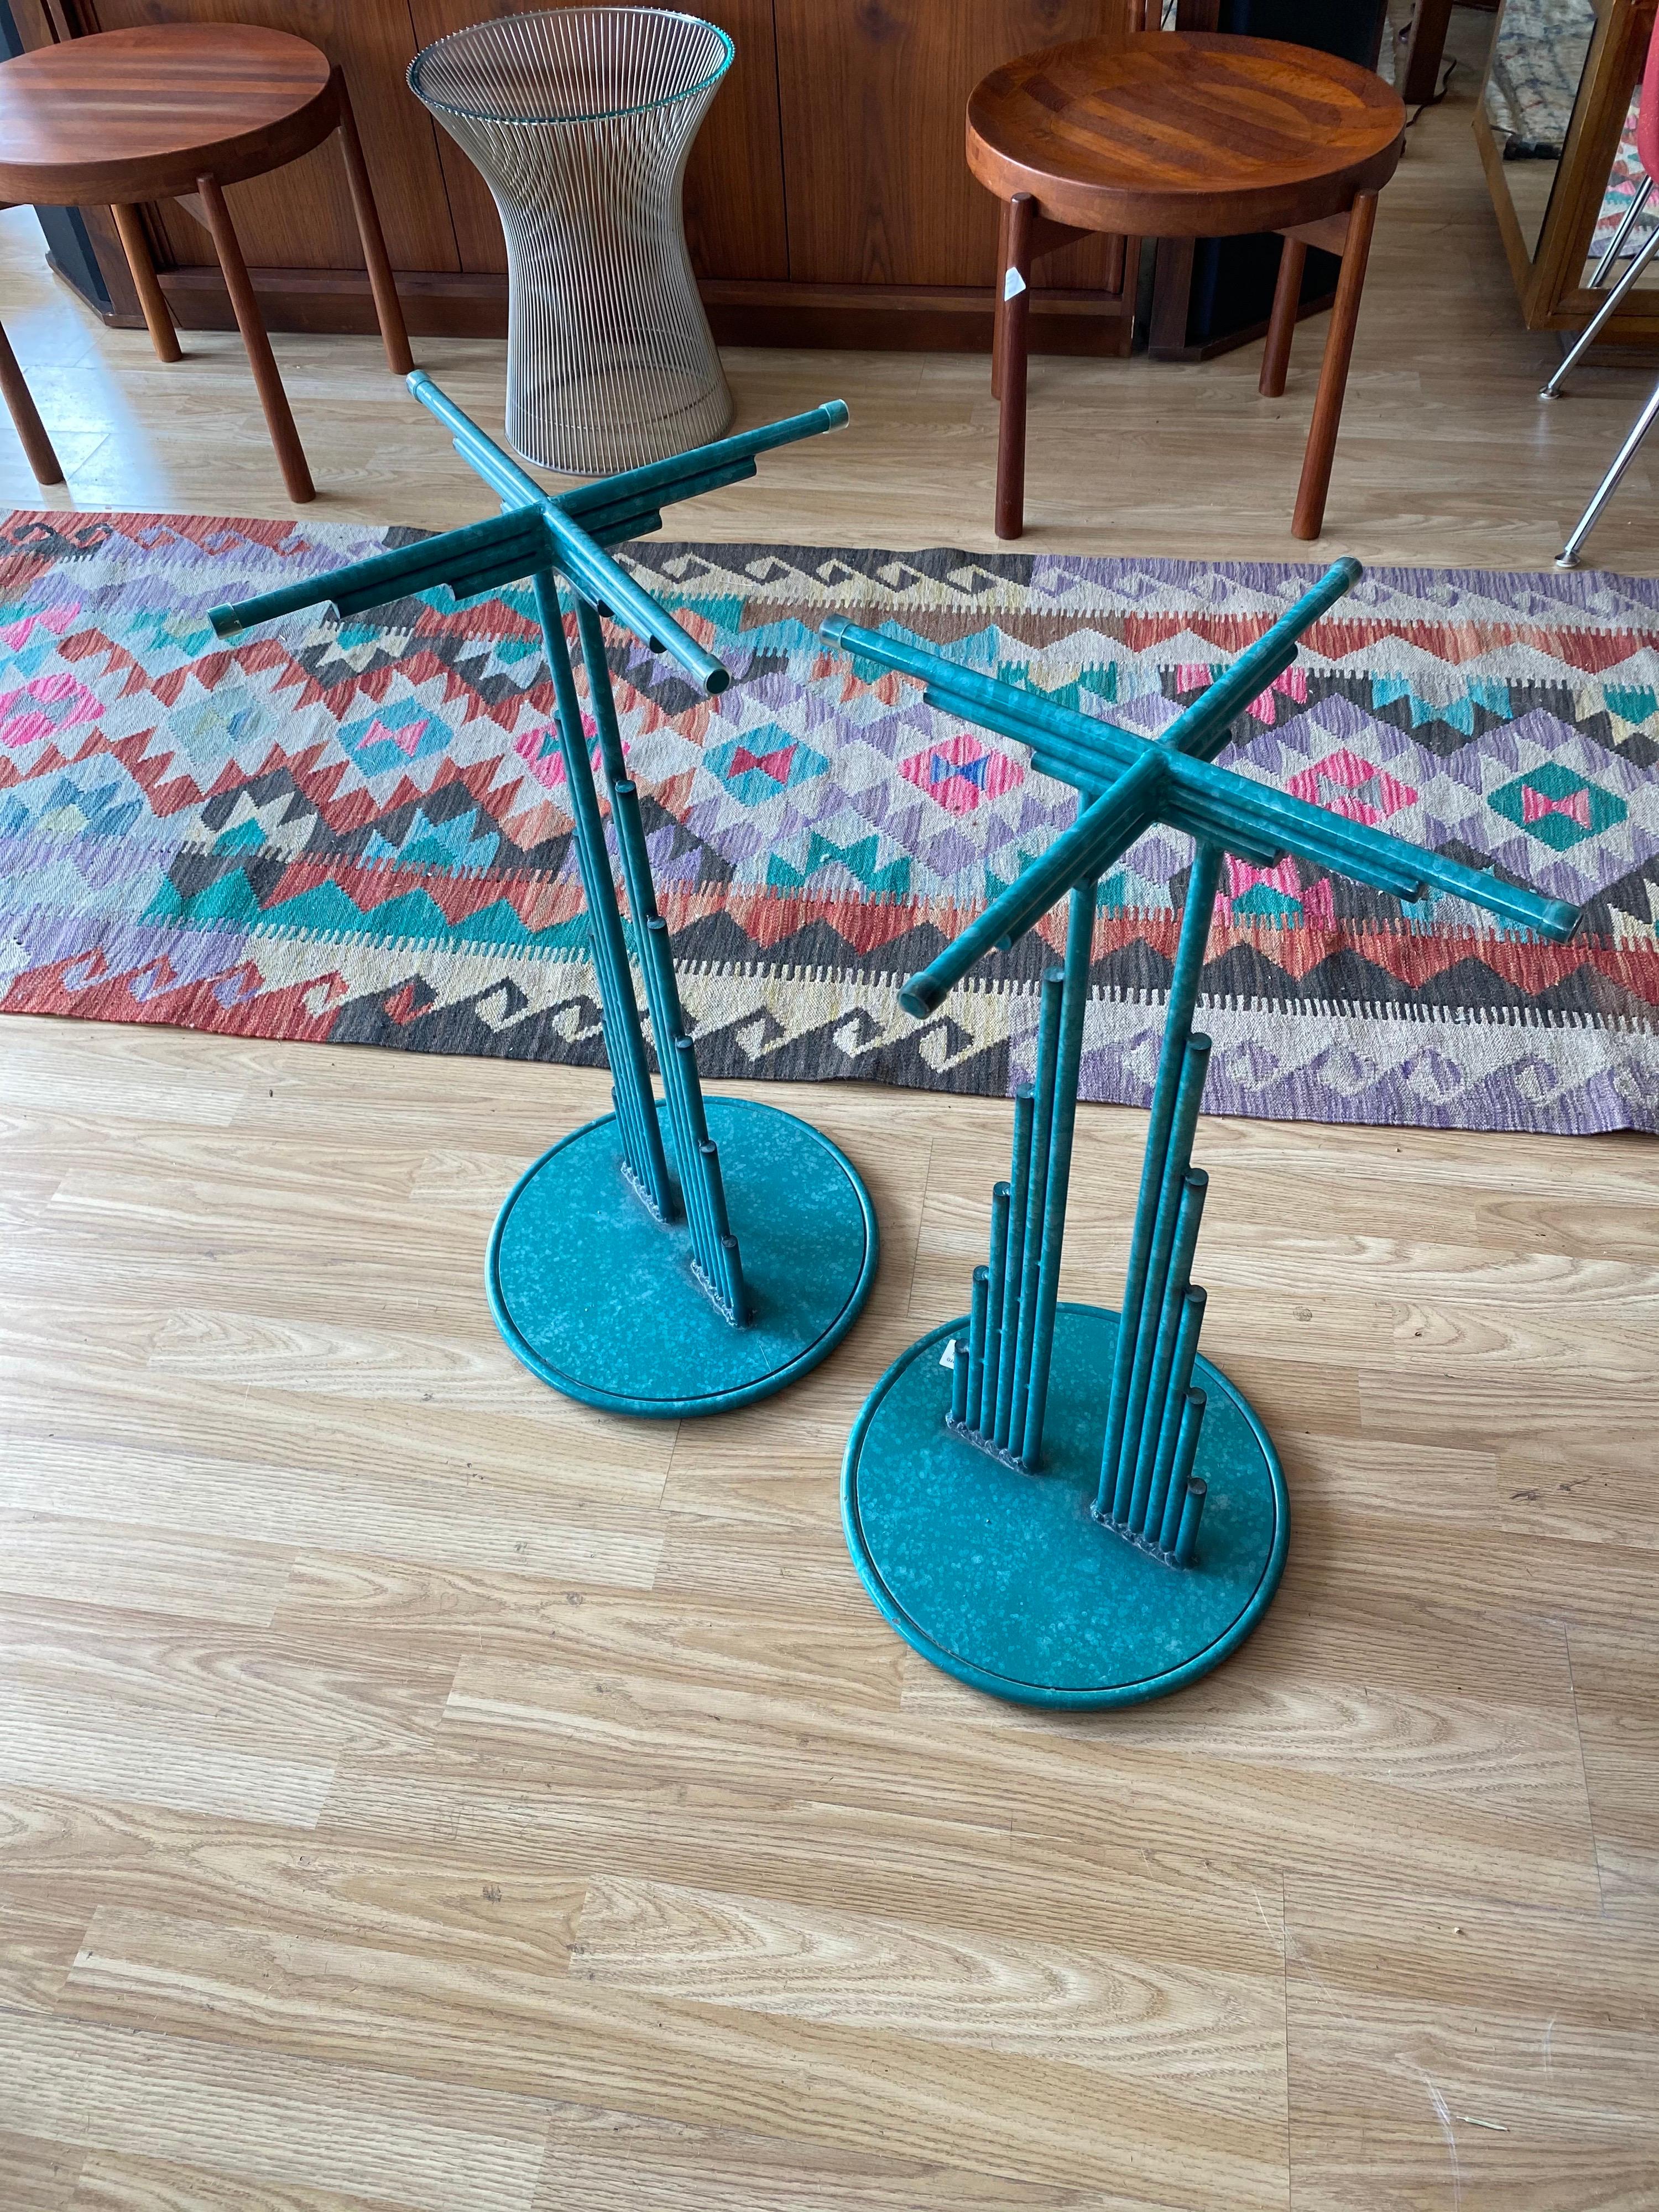 Stunning and rare mid-century modern side table stands or pedestals designed by Curtis Jere. These bright turquoise vintage side table stands can be used with a small top on each Stand or a long top to create a console. These mid-century side tables